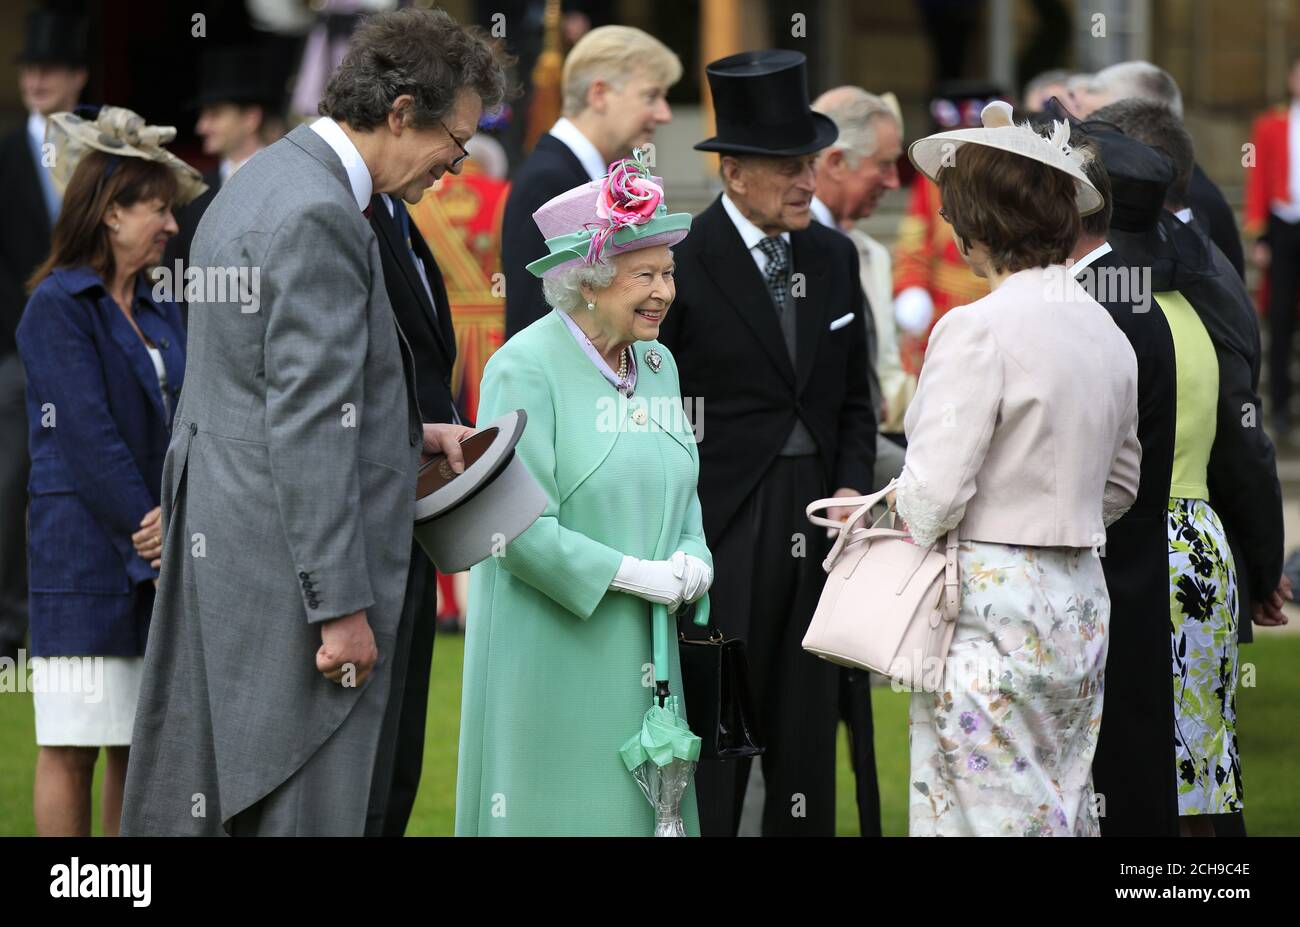 Queen Elizabeth II meets guests during a garden party at Buckingham Palace in London. Stock Photo